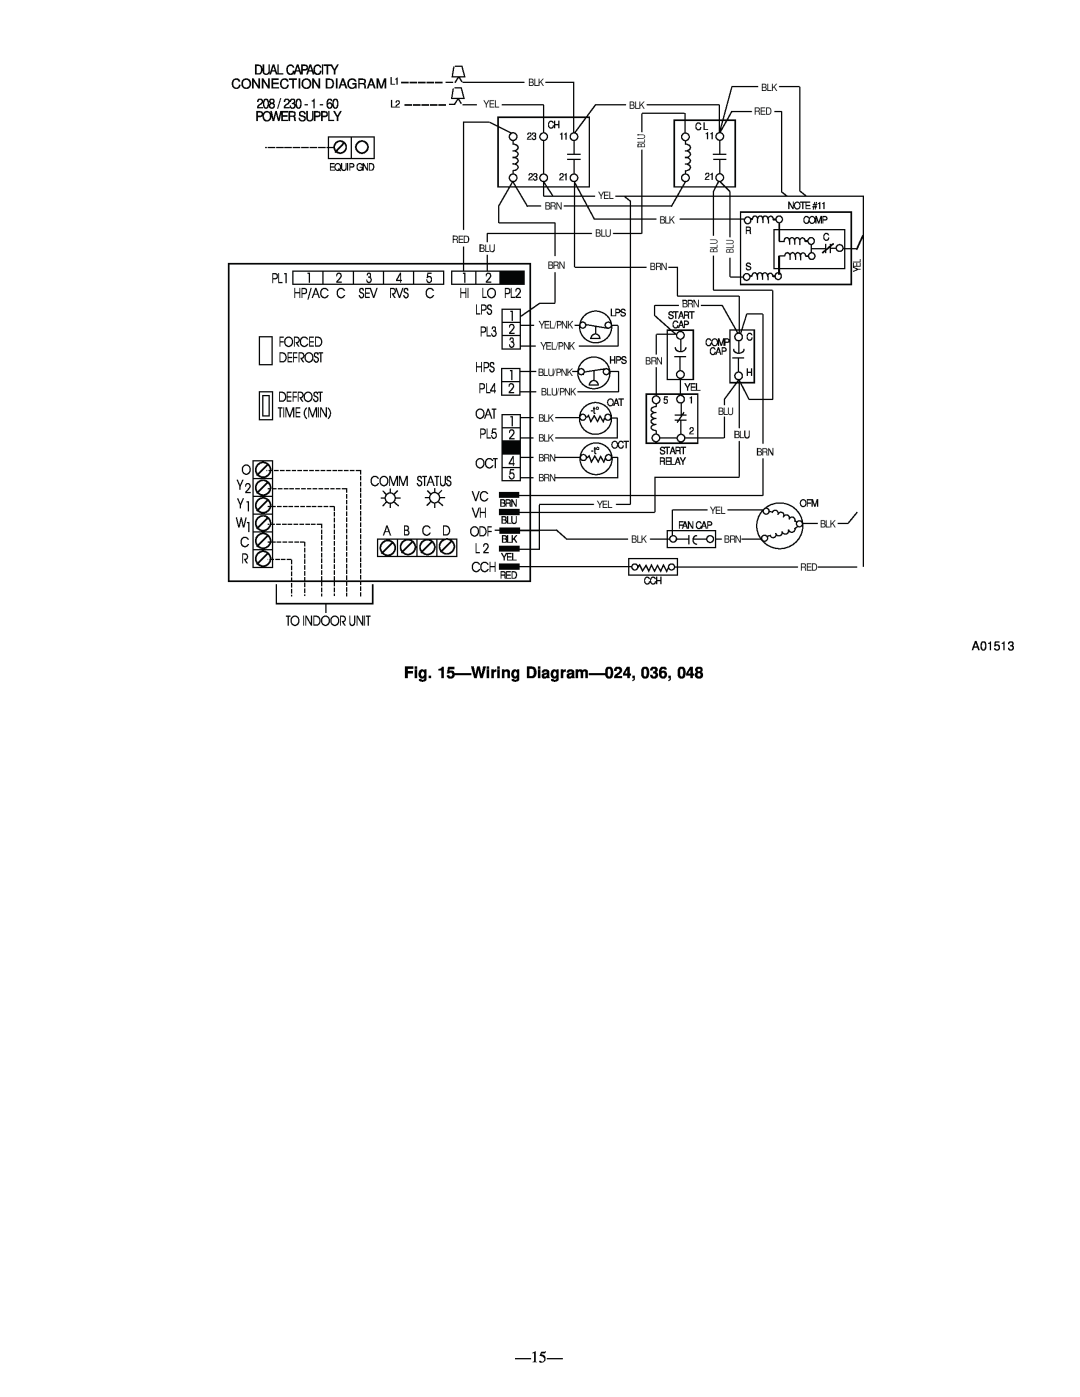 Bryant 598B instruction manual Wiring Diagram-024, LO PL2, Time Min, Comm, To Indoor Unit 